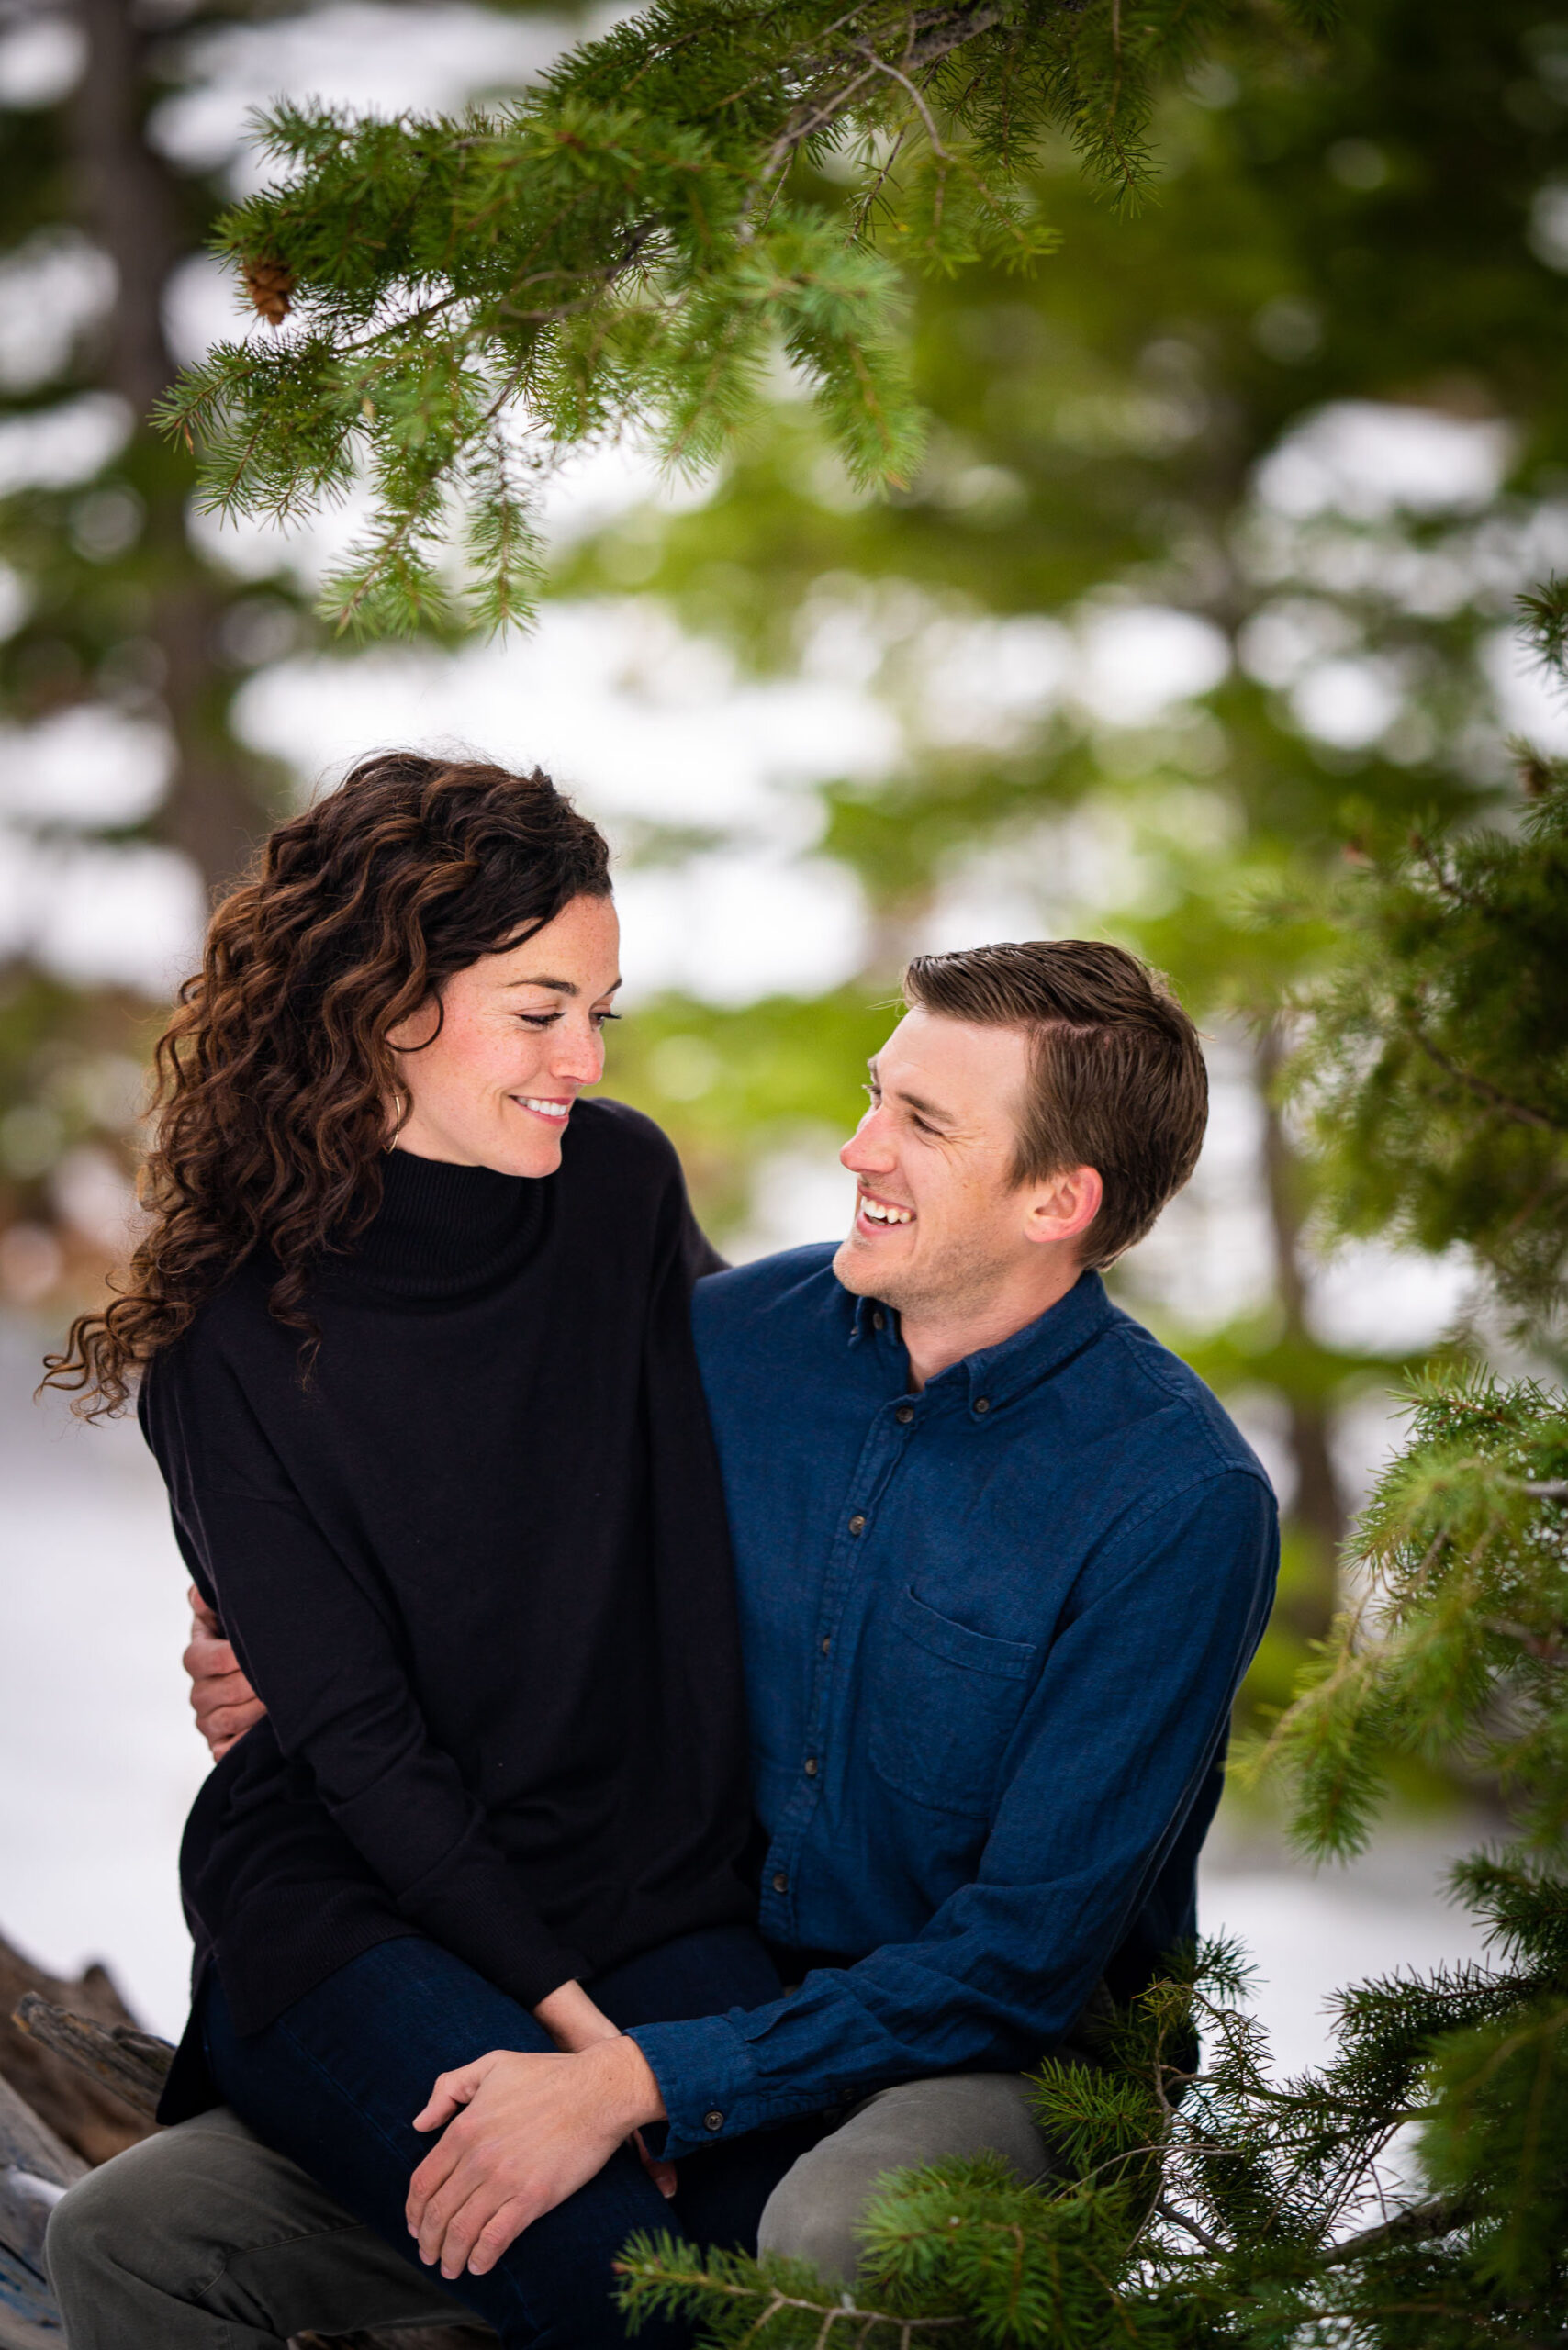 Engaged couple embraces in the snow in a dense evergreen mountain forest, Engagement Session, Engagement Photos, Engagement Photos Inspiration, Engagement Photography, Engagement Photographer, Winter Engagement Photos, Mountain Engagement Photos, Lost Gulch Overlook engagement session, Lost Gulch Overlook engagement photos, Lost Gulch Overlook engagement photography, Lost Gulch Overlook engagement photographer, Lost Gulch Overlook  engagement inspiration, Boulder engagement session, Boulder engagement photos, Boulder engagement photography, Boulder engagement photographer, Boulder engagement inspiration, Colorado engagement session, Colorado engagement photos, Colorado engagement photography, Colorado engagement photographer, Colorado engagement inspiration